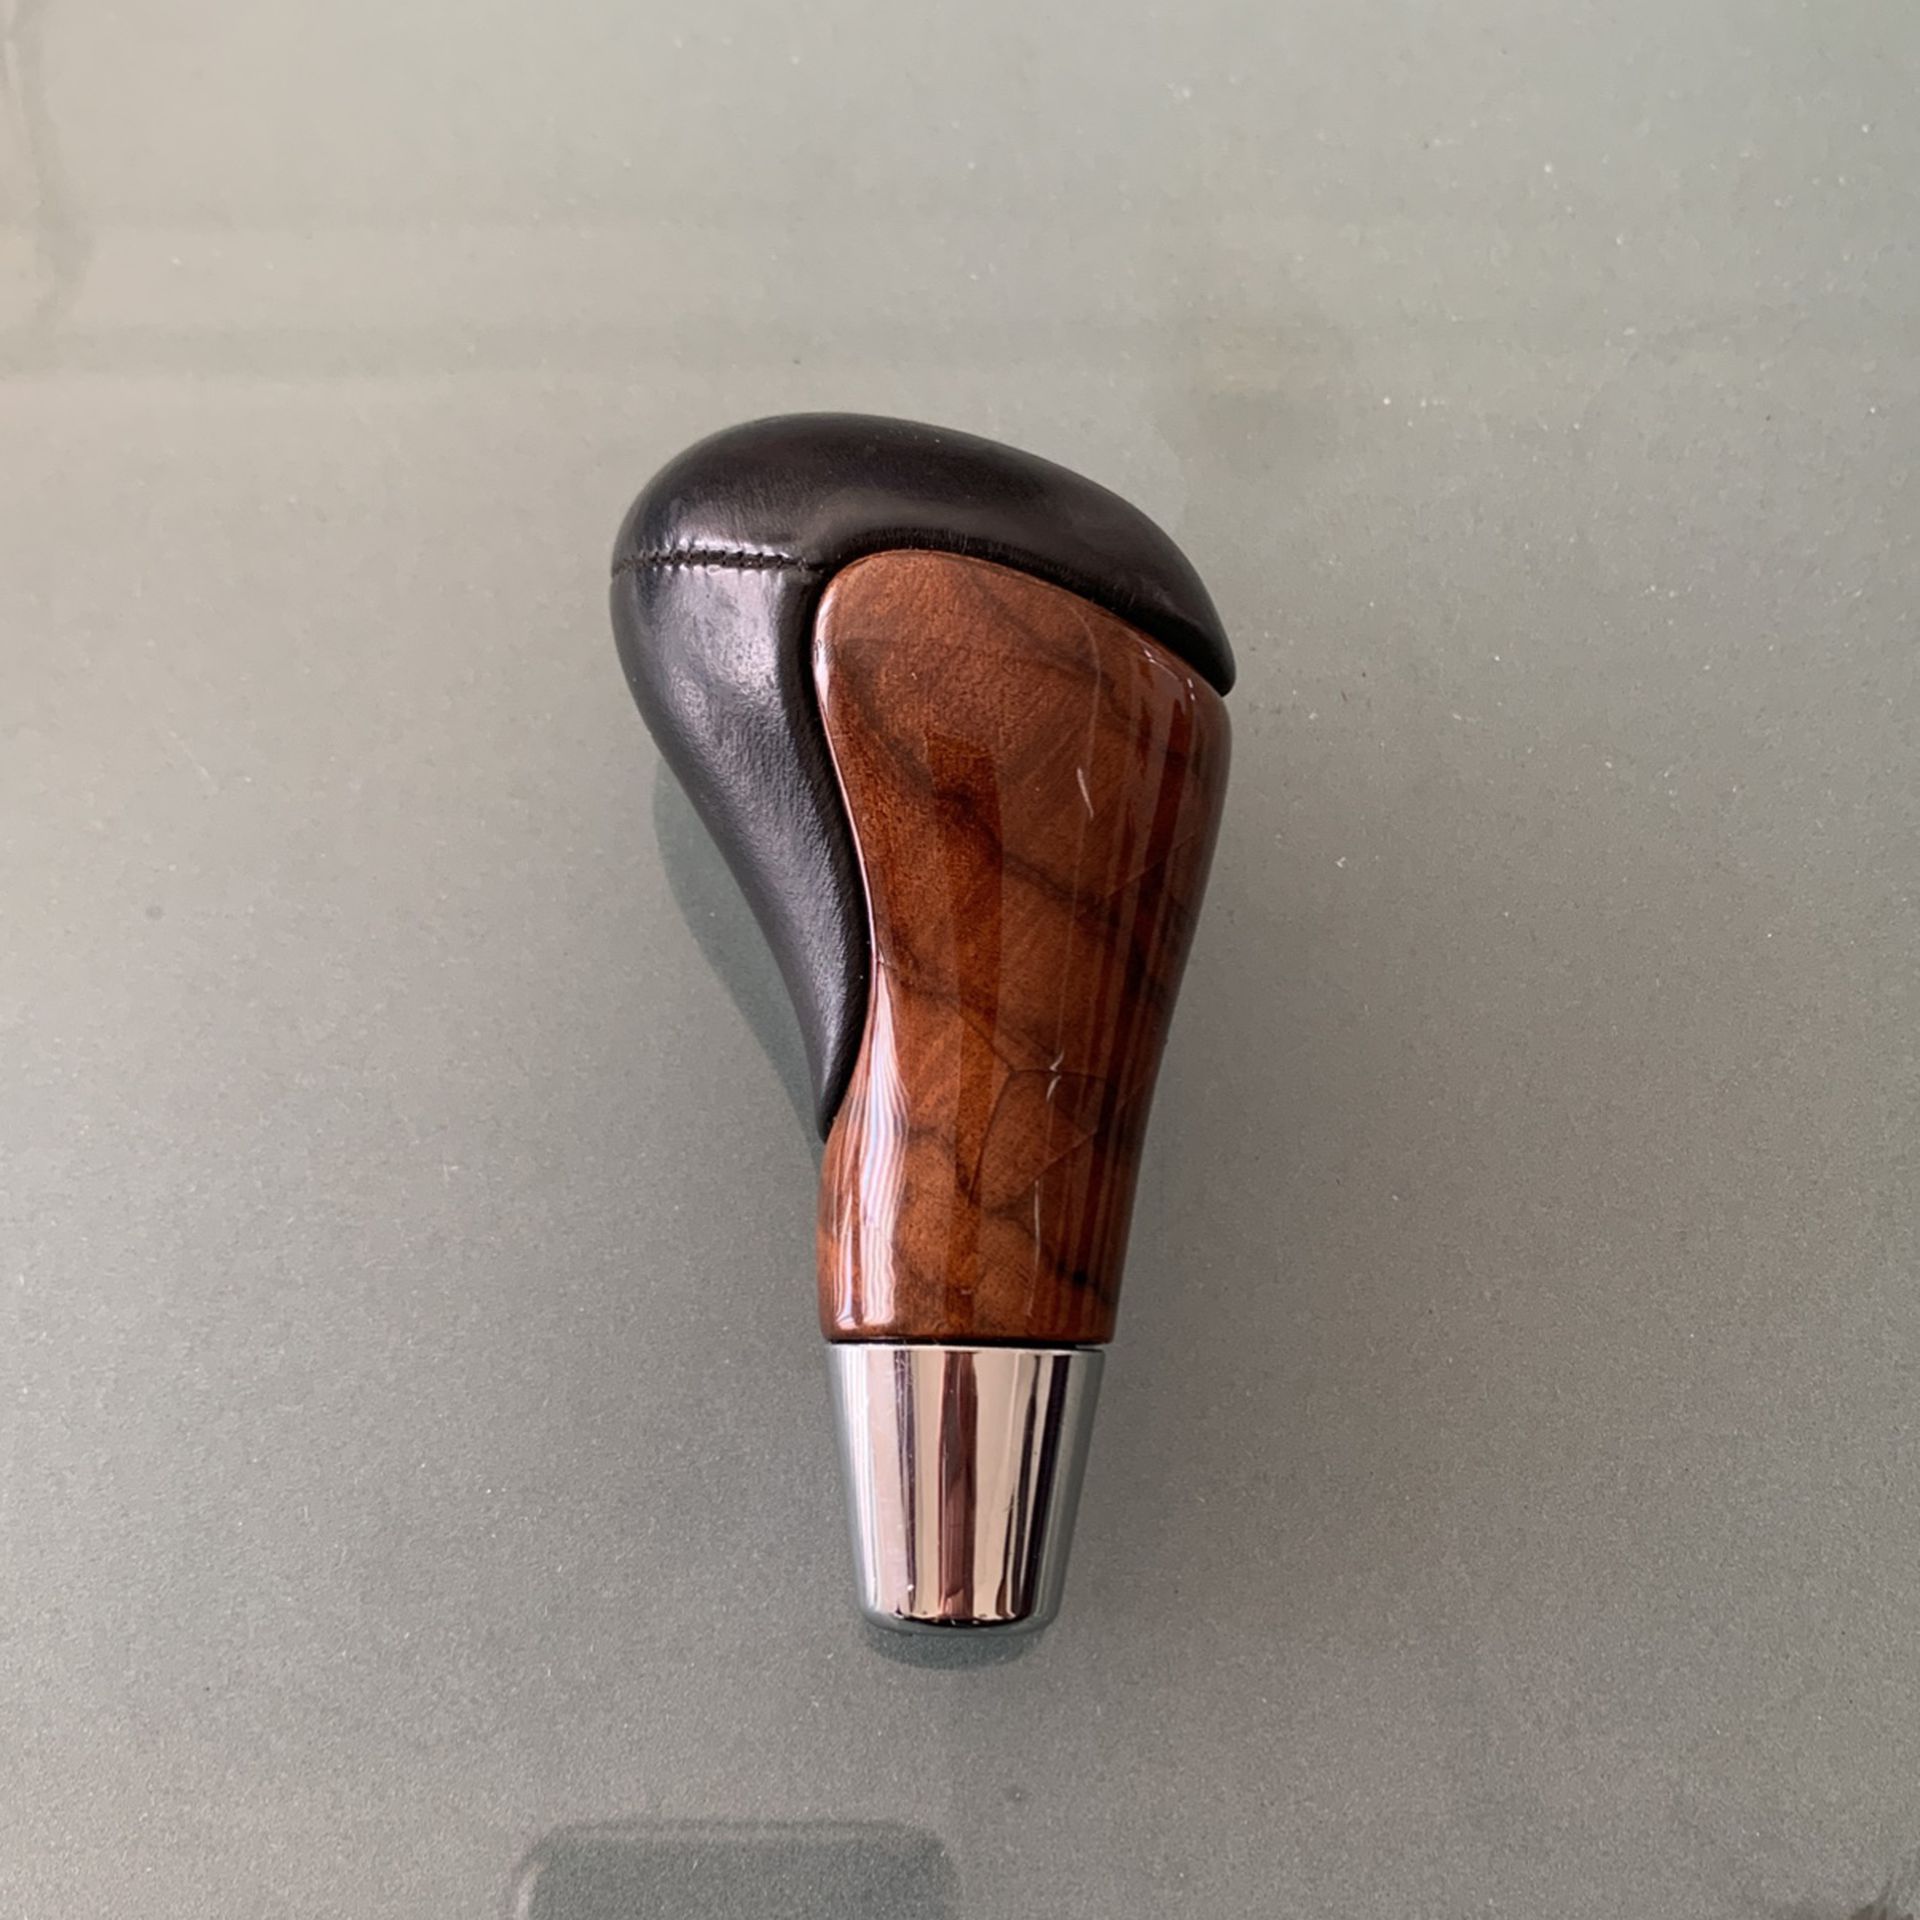 Gear Shift Knob (OEM )- For A Mercedes CL500 - 2000-2006 = $25